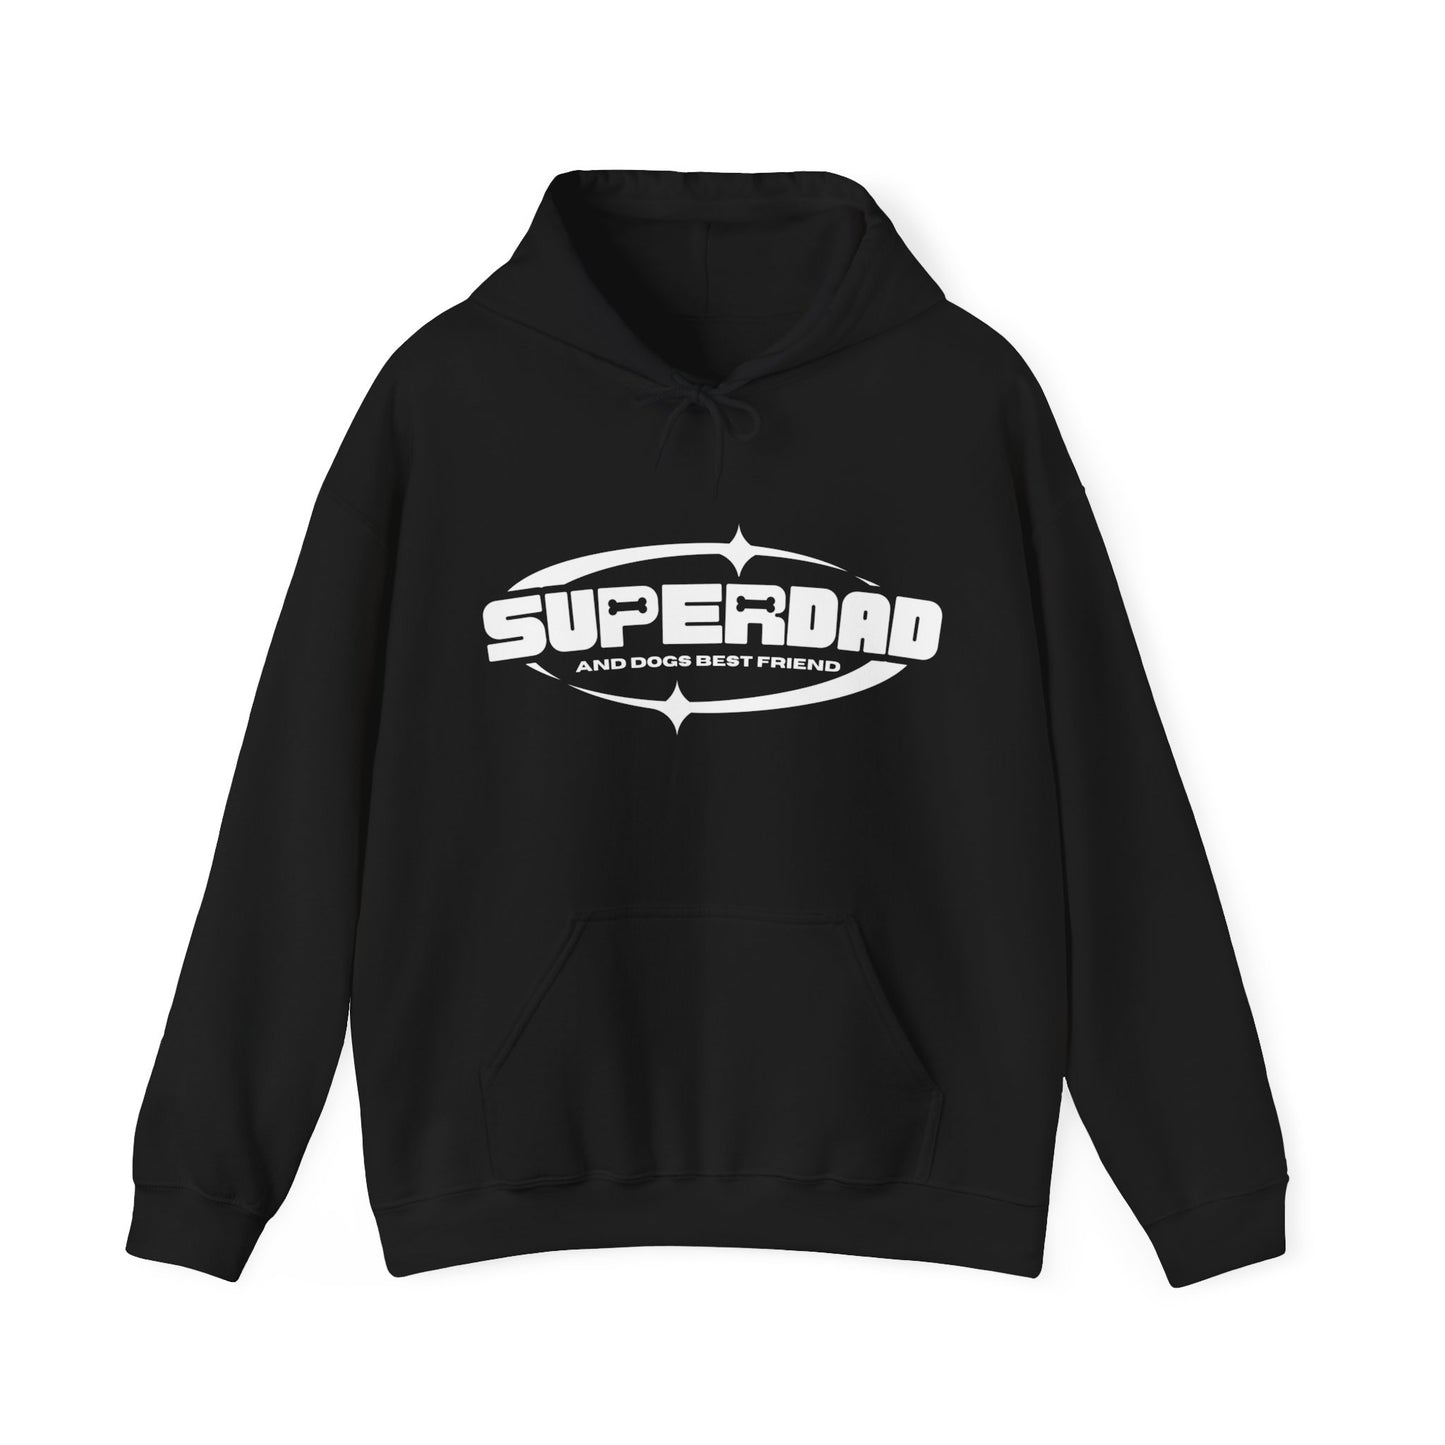 On a crisp white surface, a 'Superdad' unisex black sweatshirt from Dogs Pure Love is displayed.